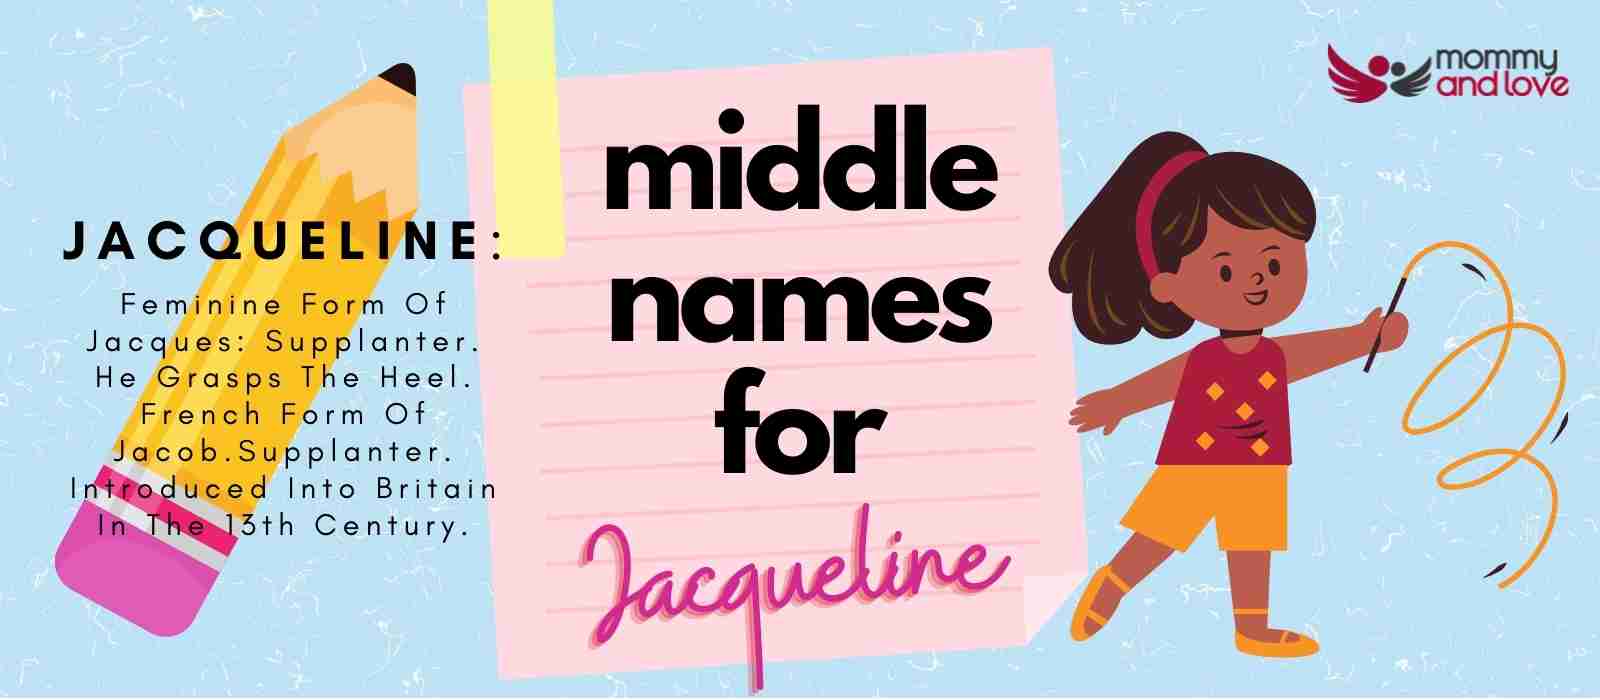 Middle Names for Jacqueline